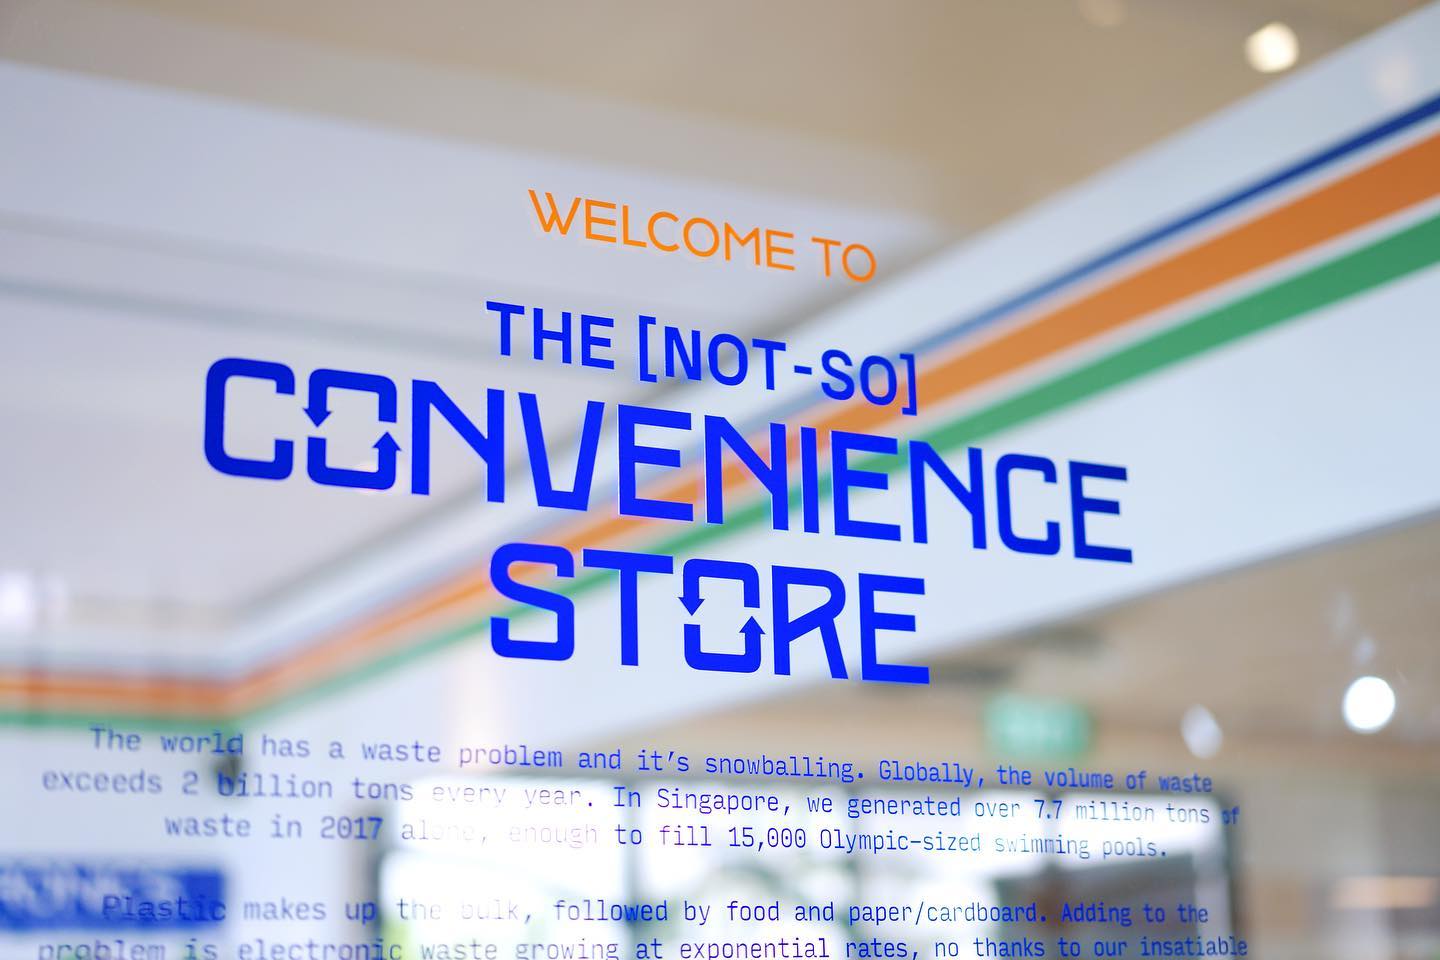 New inconvenience store opens at Dhoby Ghaut selling sustainable